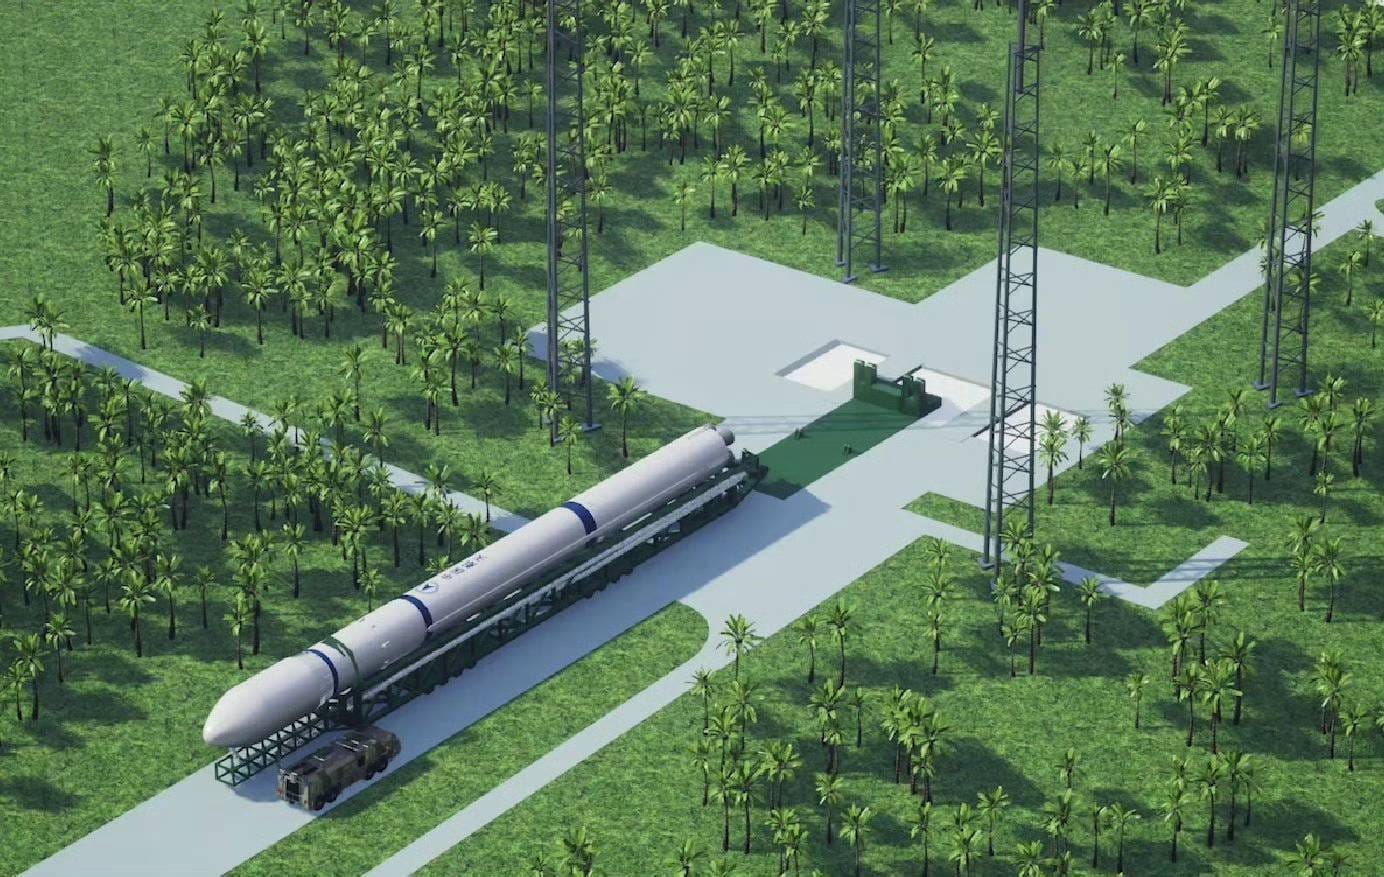 A render of what is believed to be the Long March 12 being transported to a launch pad.